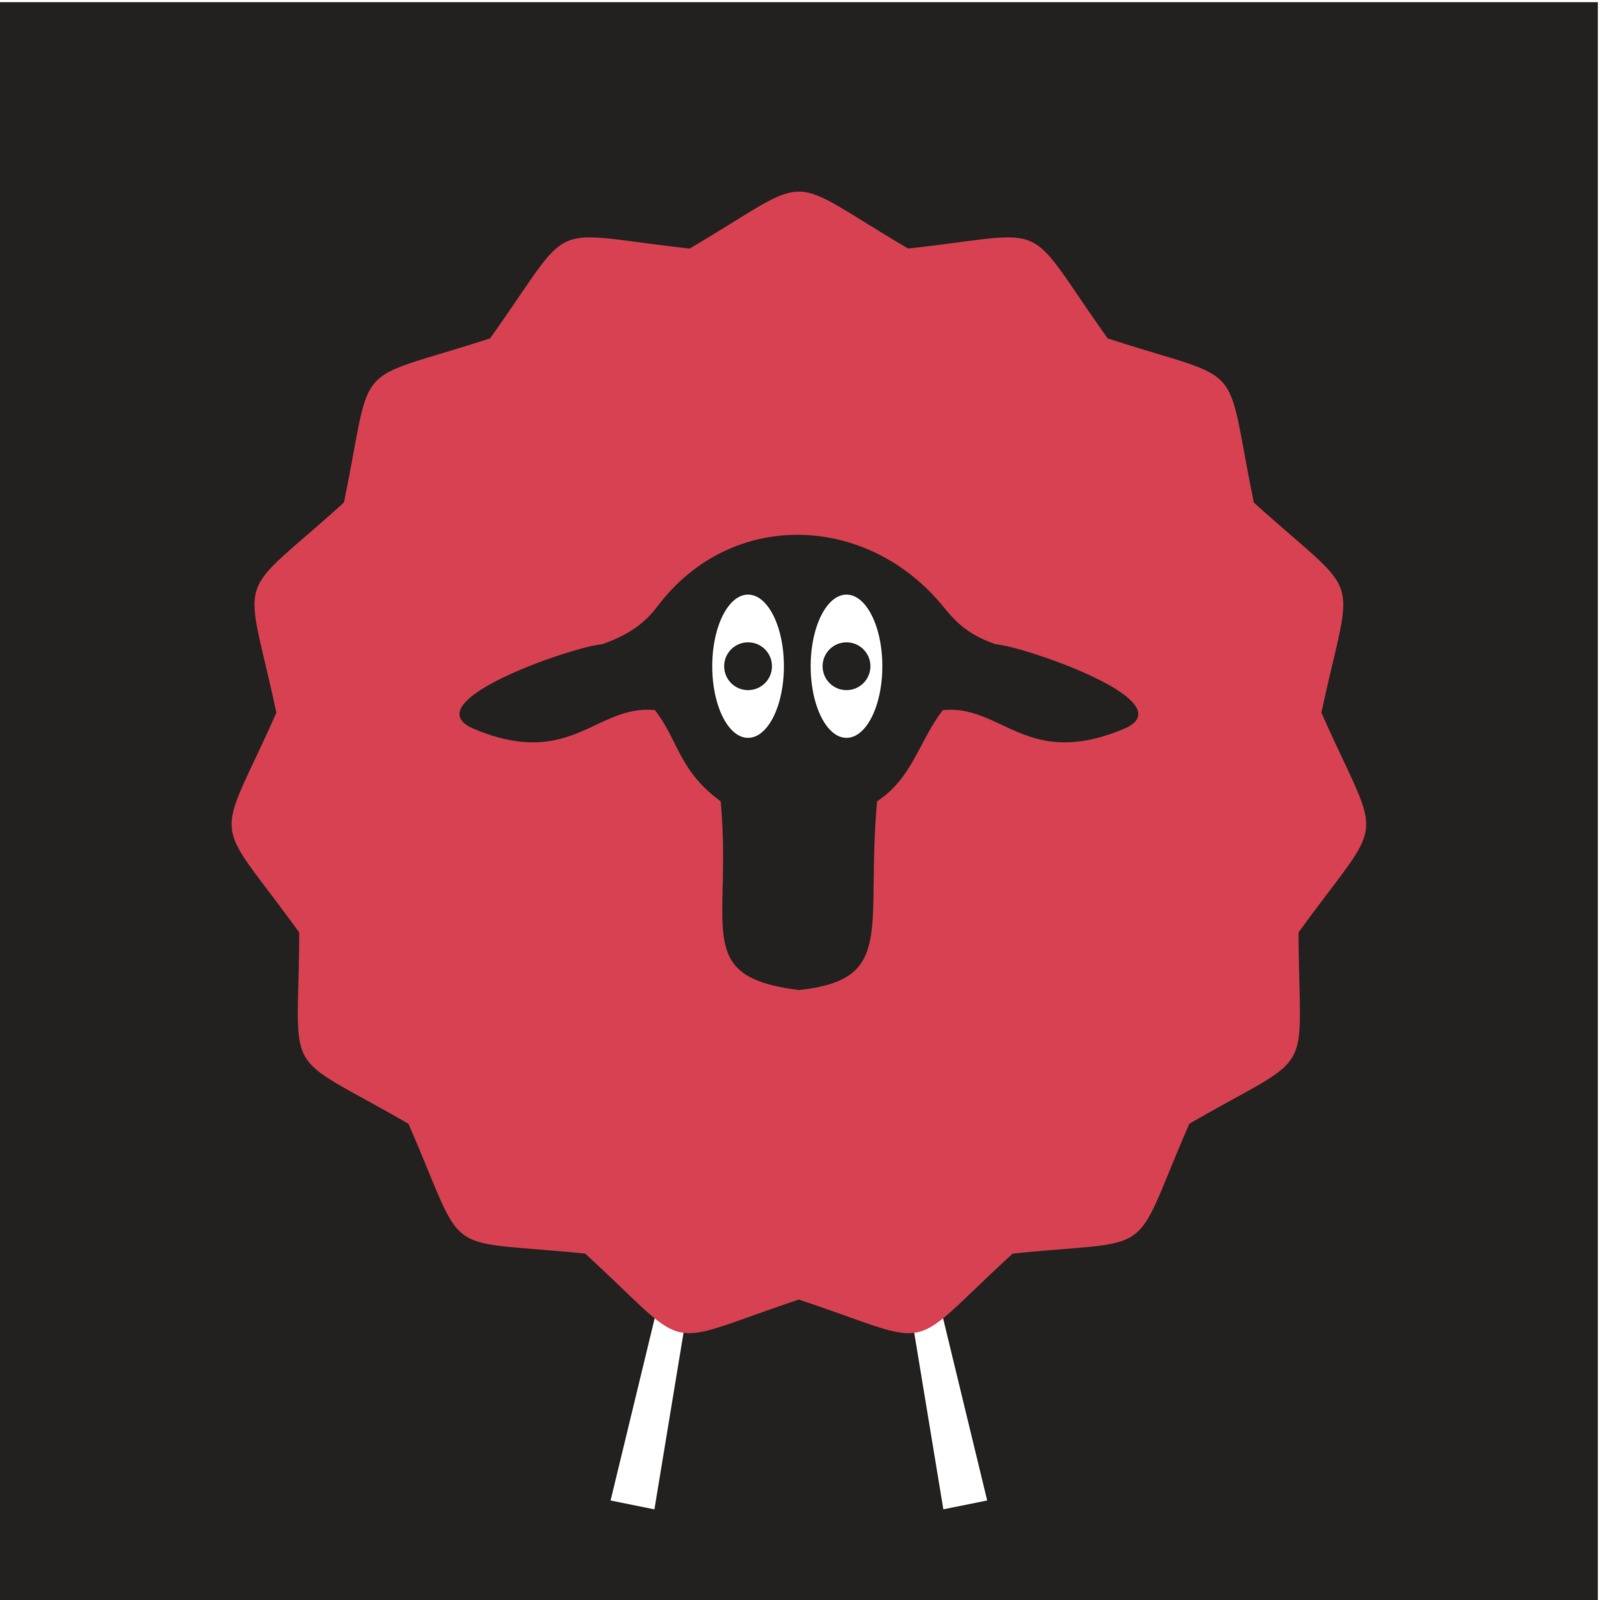 red sheep on a black background